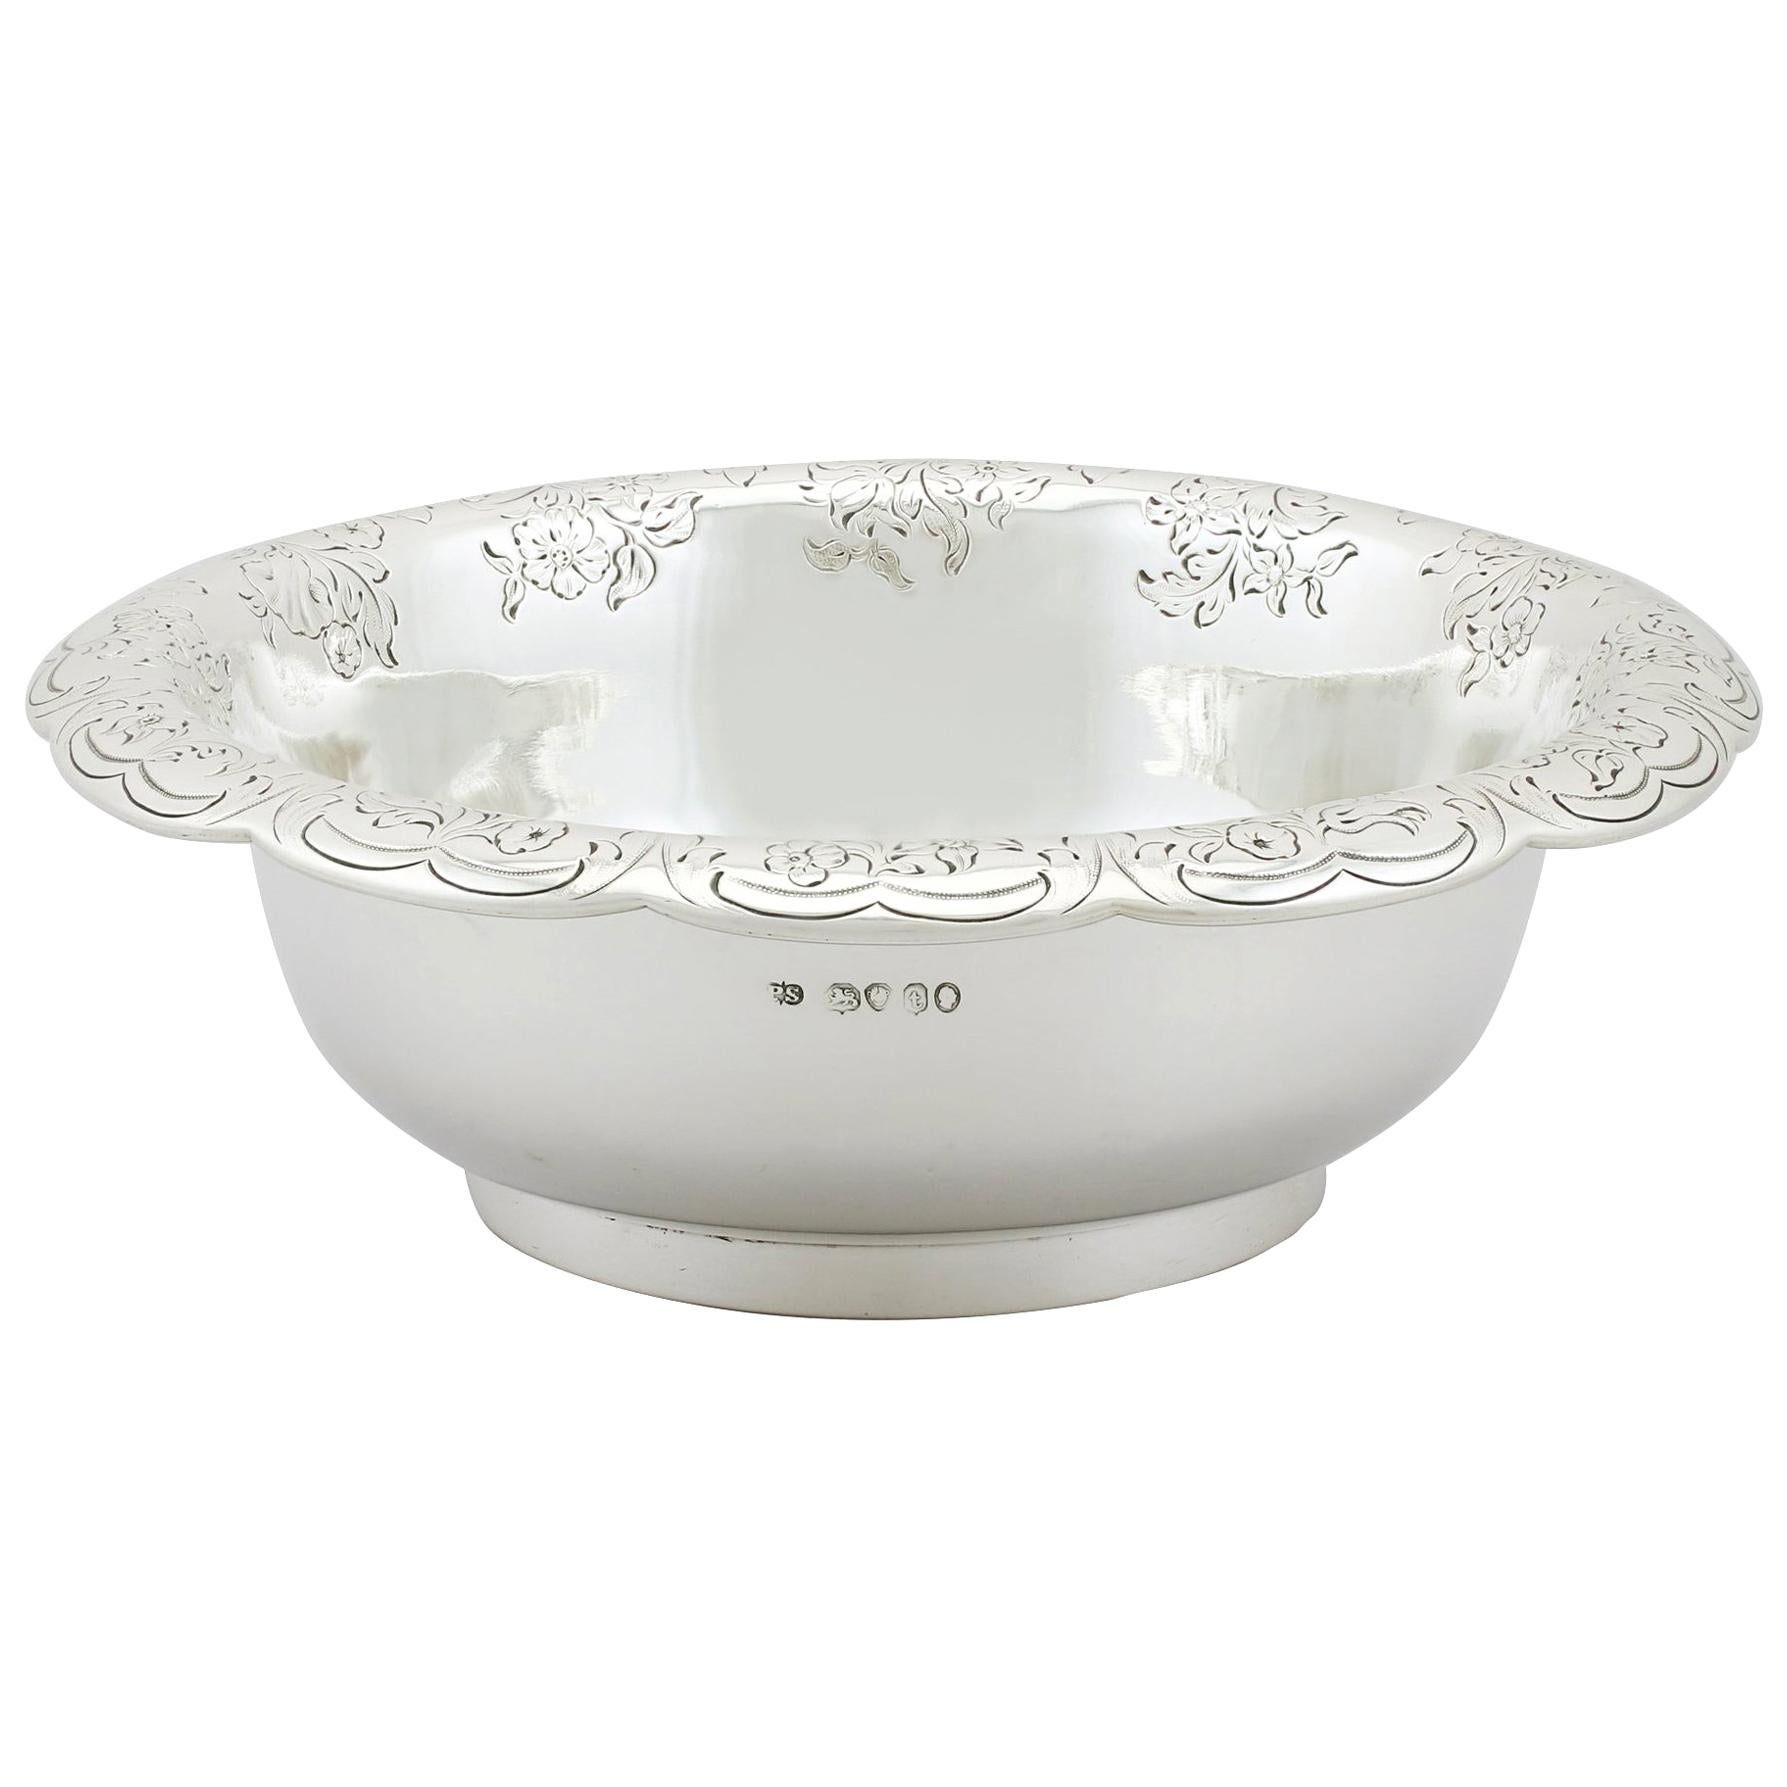 Antique Sterling Silver Bowl by Paul Storr, 1834